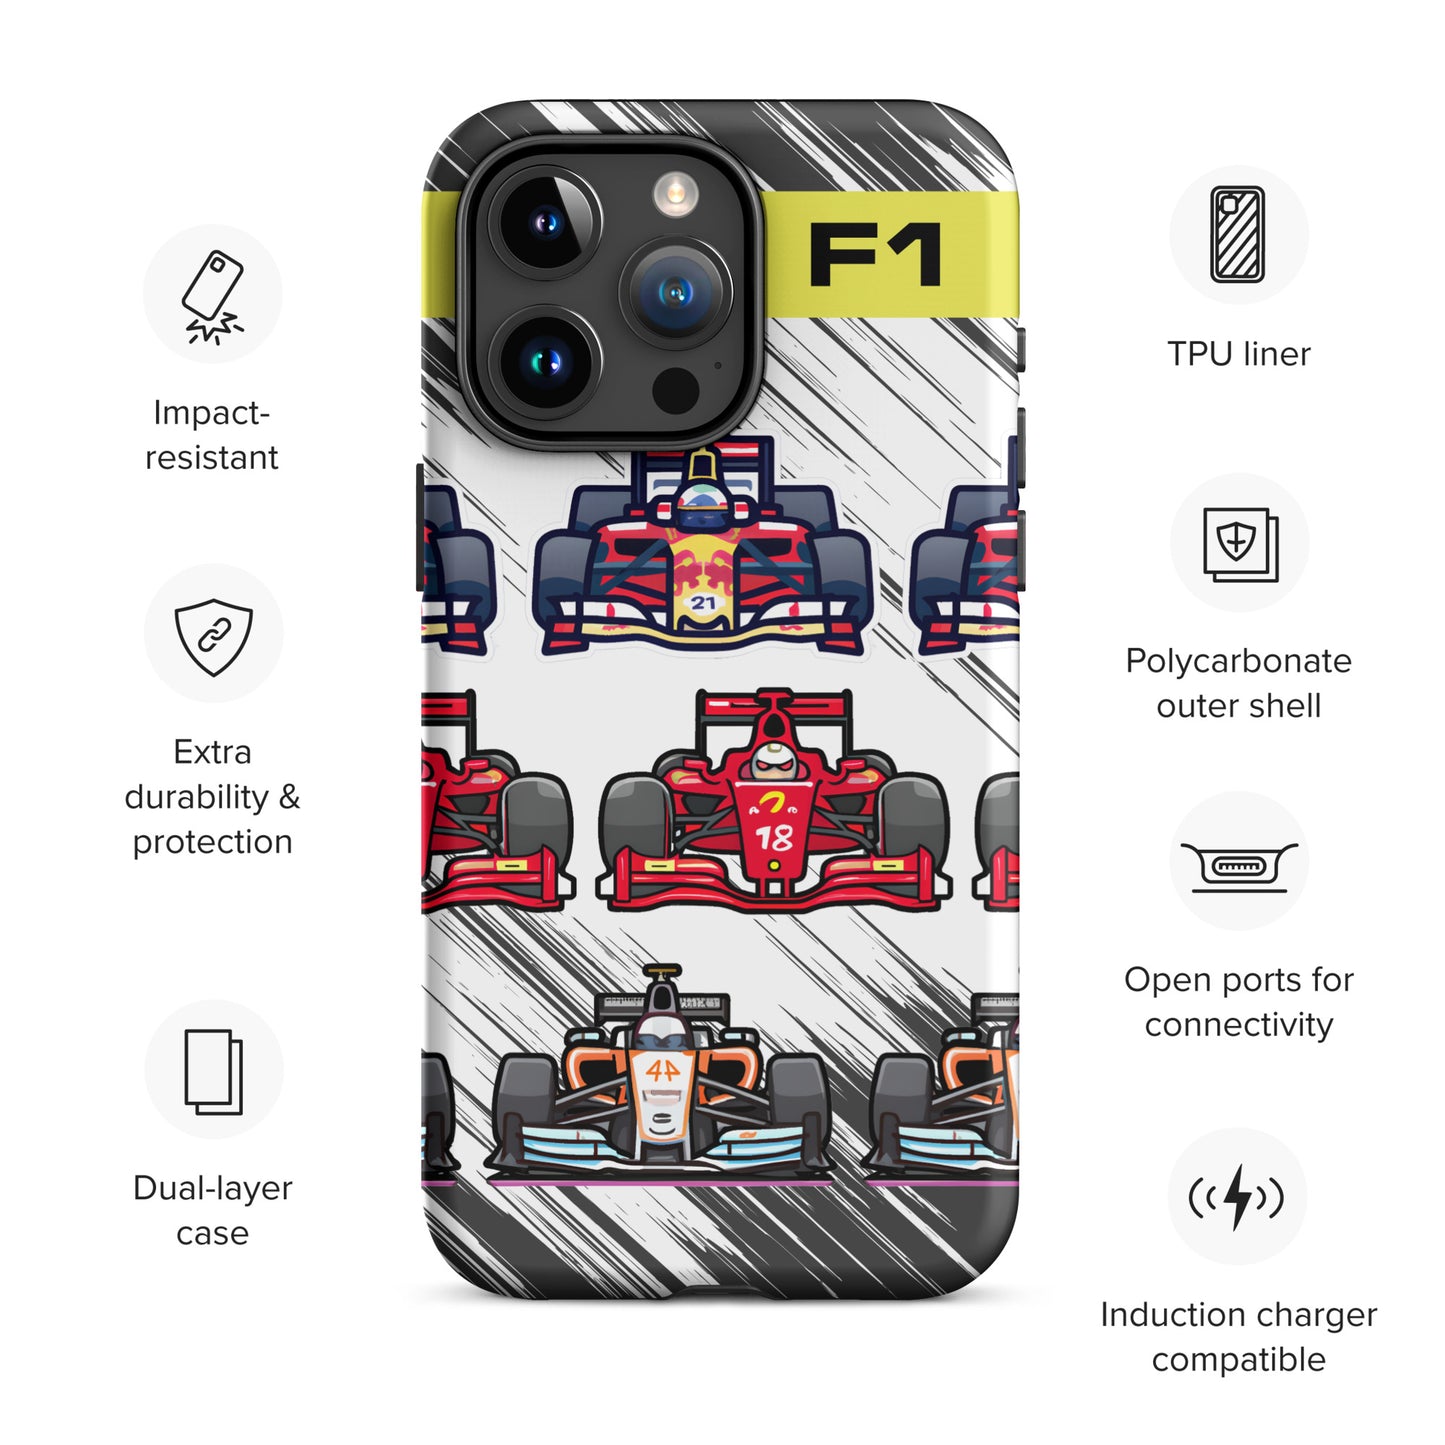 feature specification of the F1 phone case